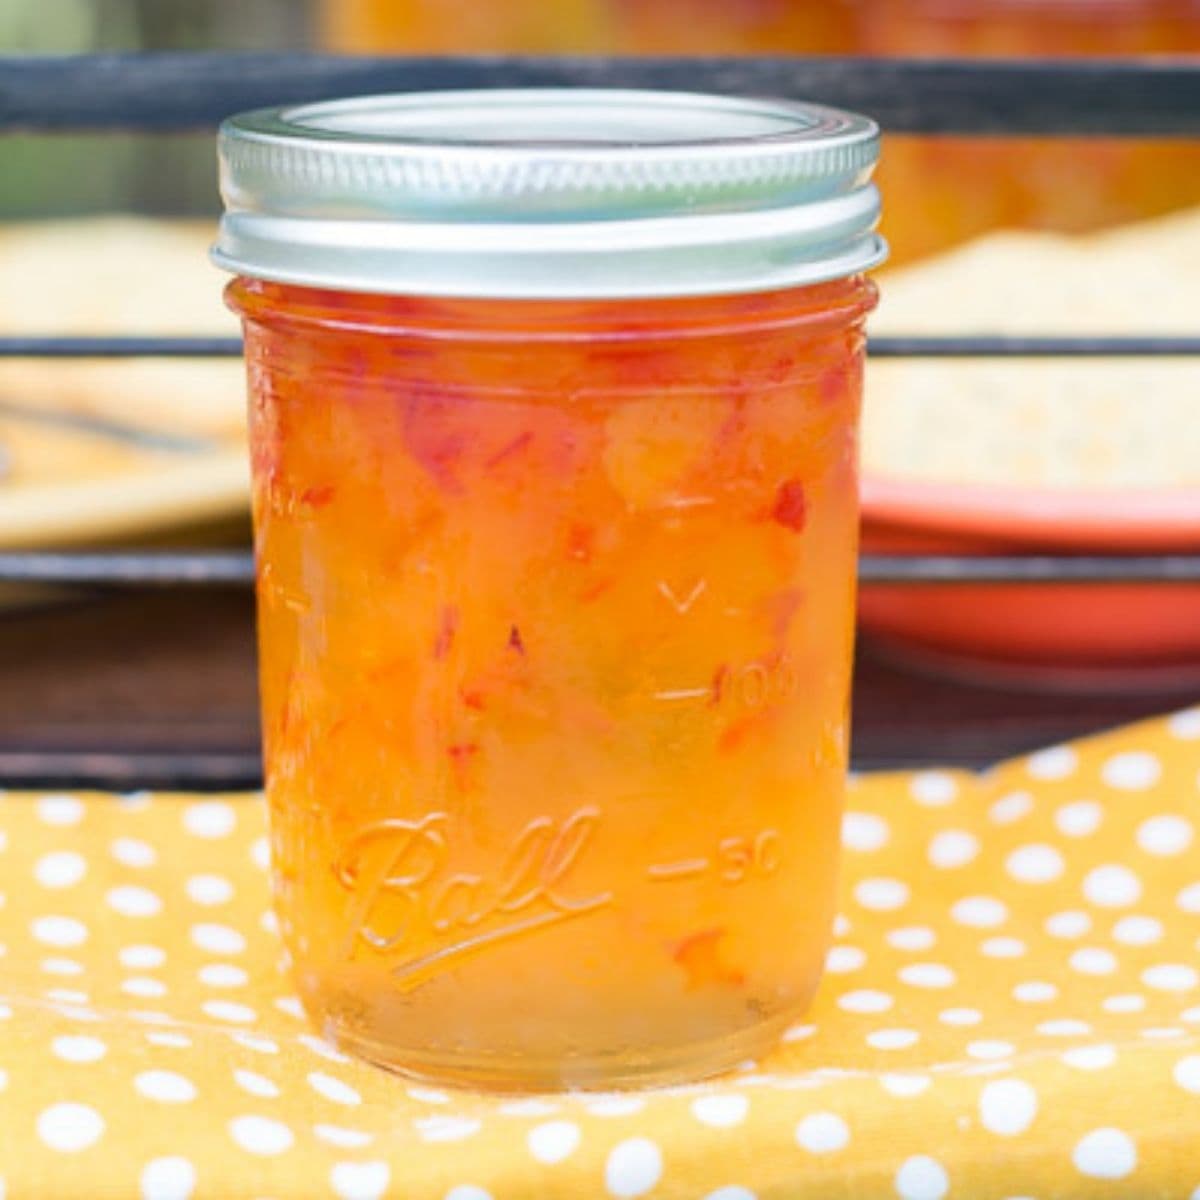 A canning jar filled with Habanero Apricot Jelly on a yellow cloth napkin.